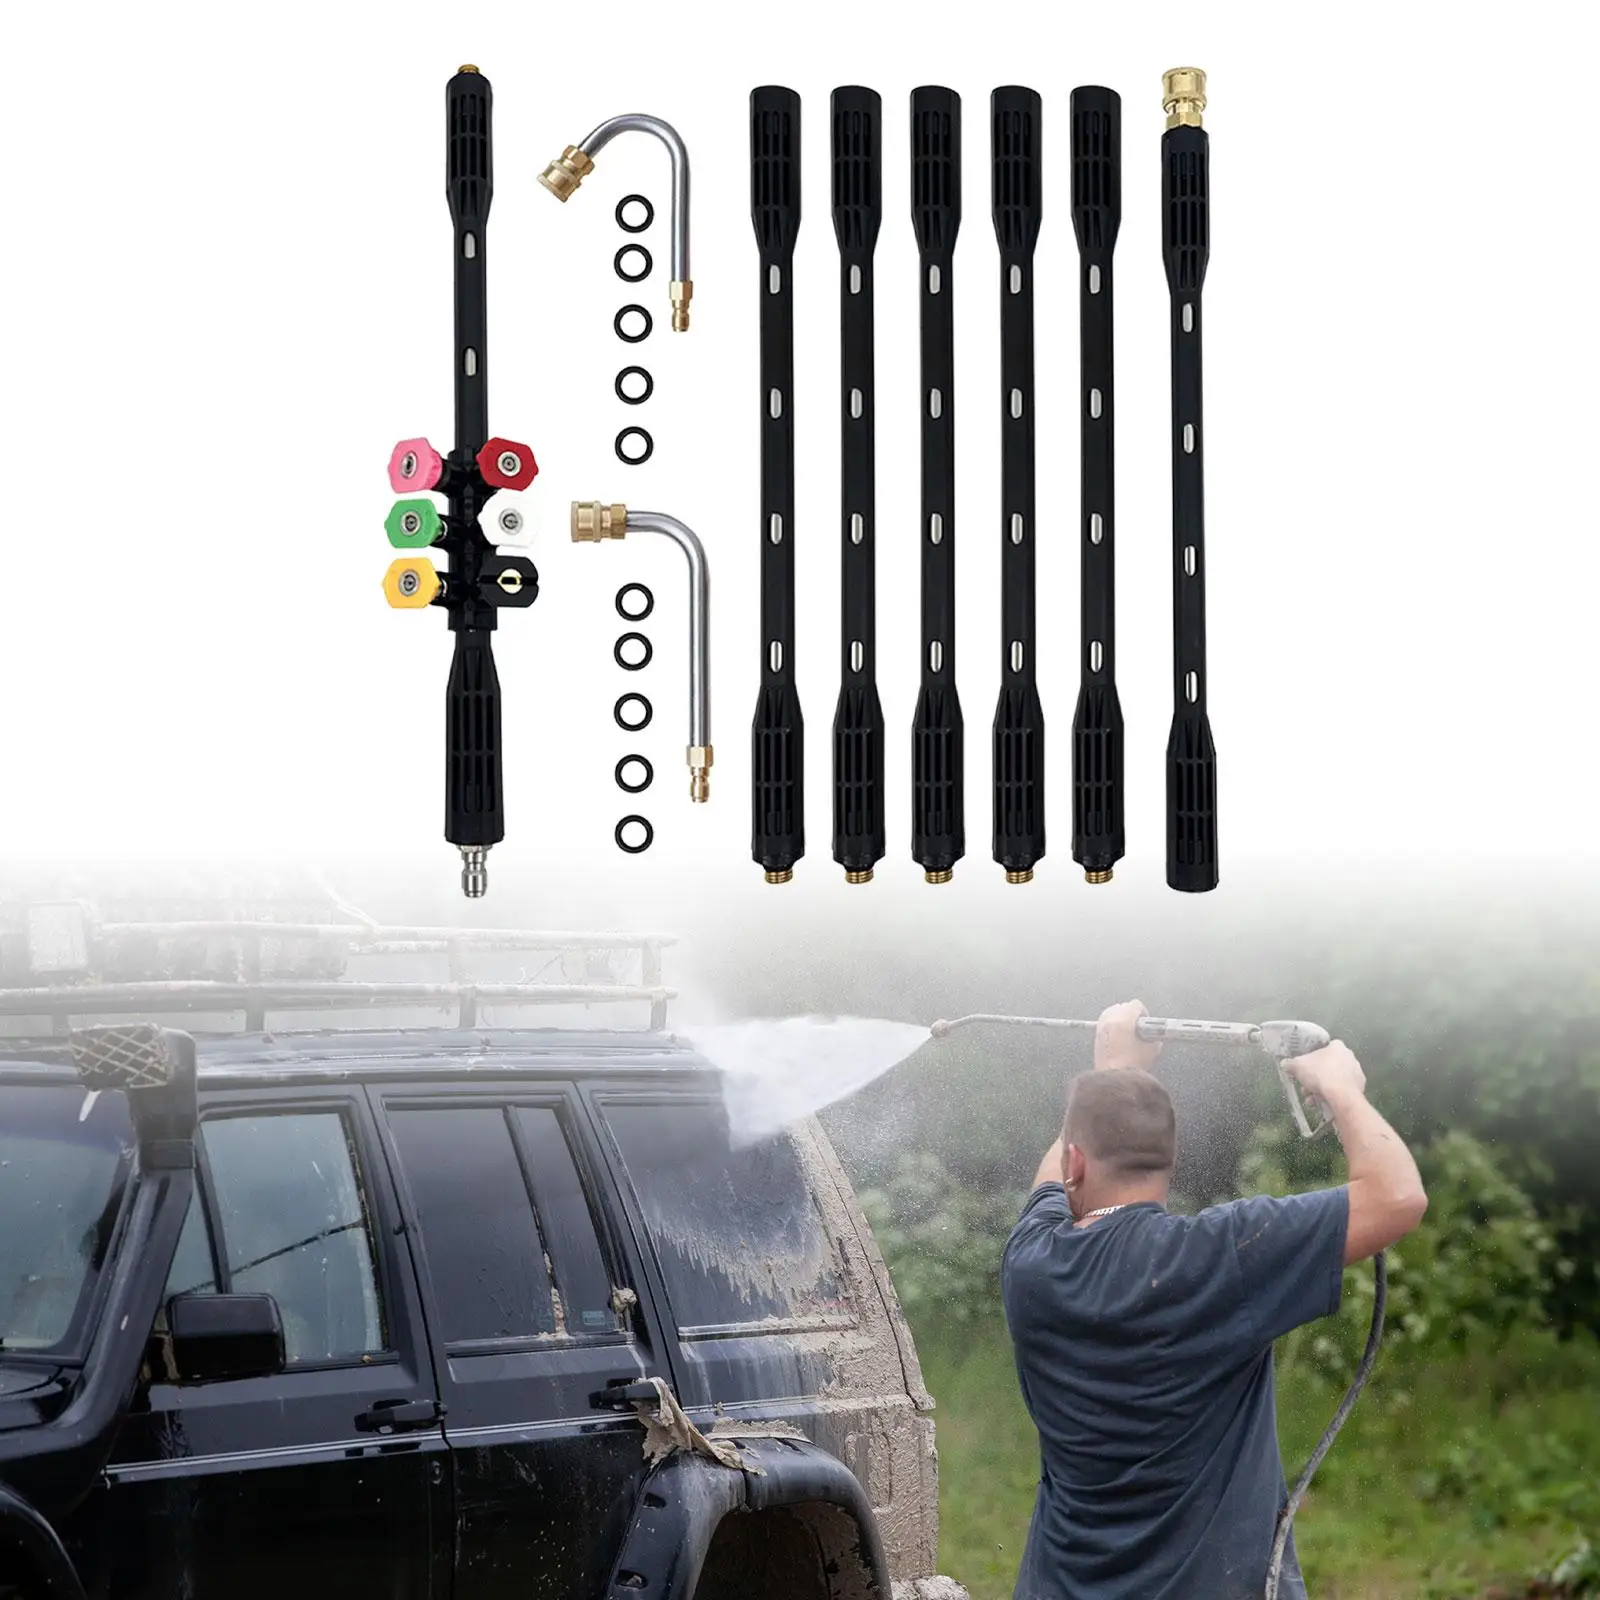 9Pcs Pressure Washer Extension Rod Fittings with 6 Spray Nozzle Tips Power Washer Lance for Undercarriage Cleaner Deck Walkway